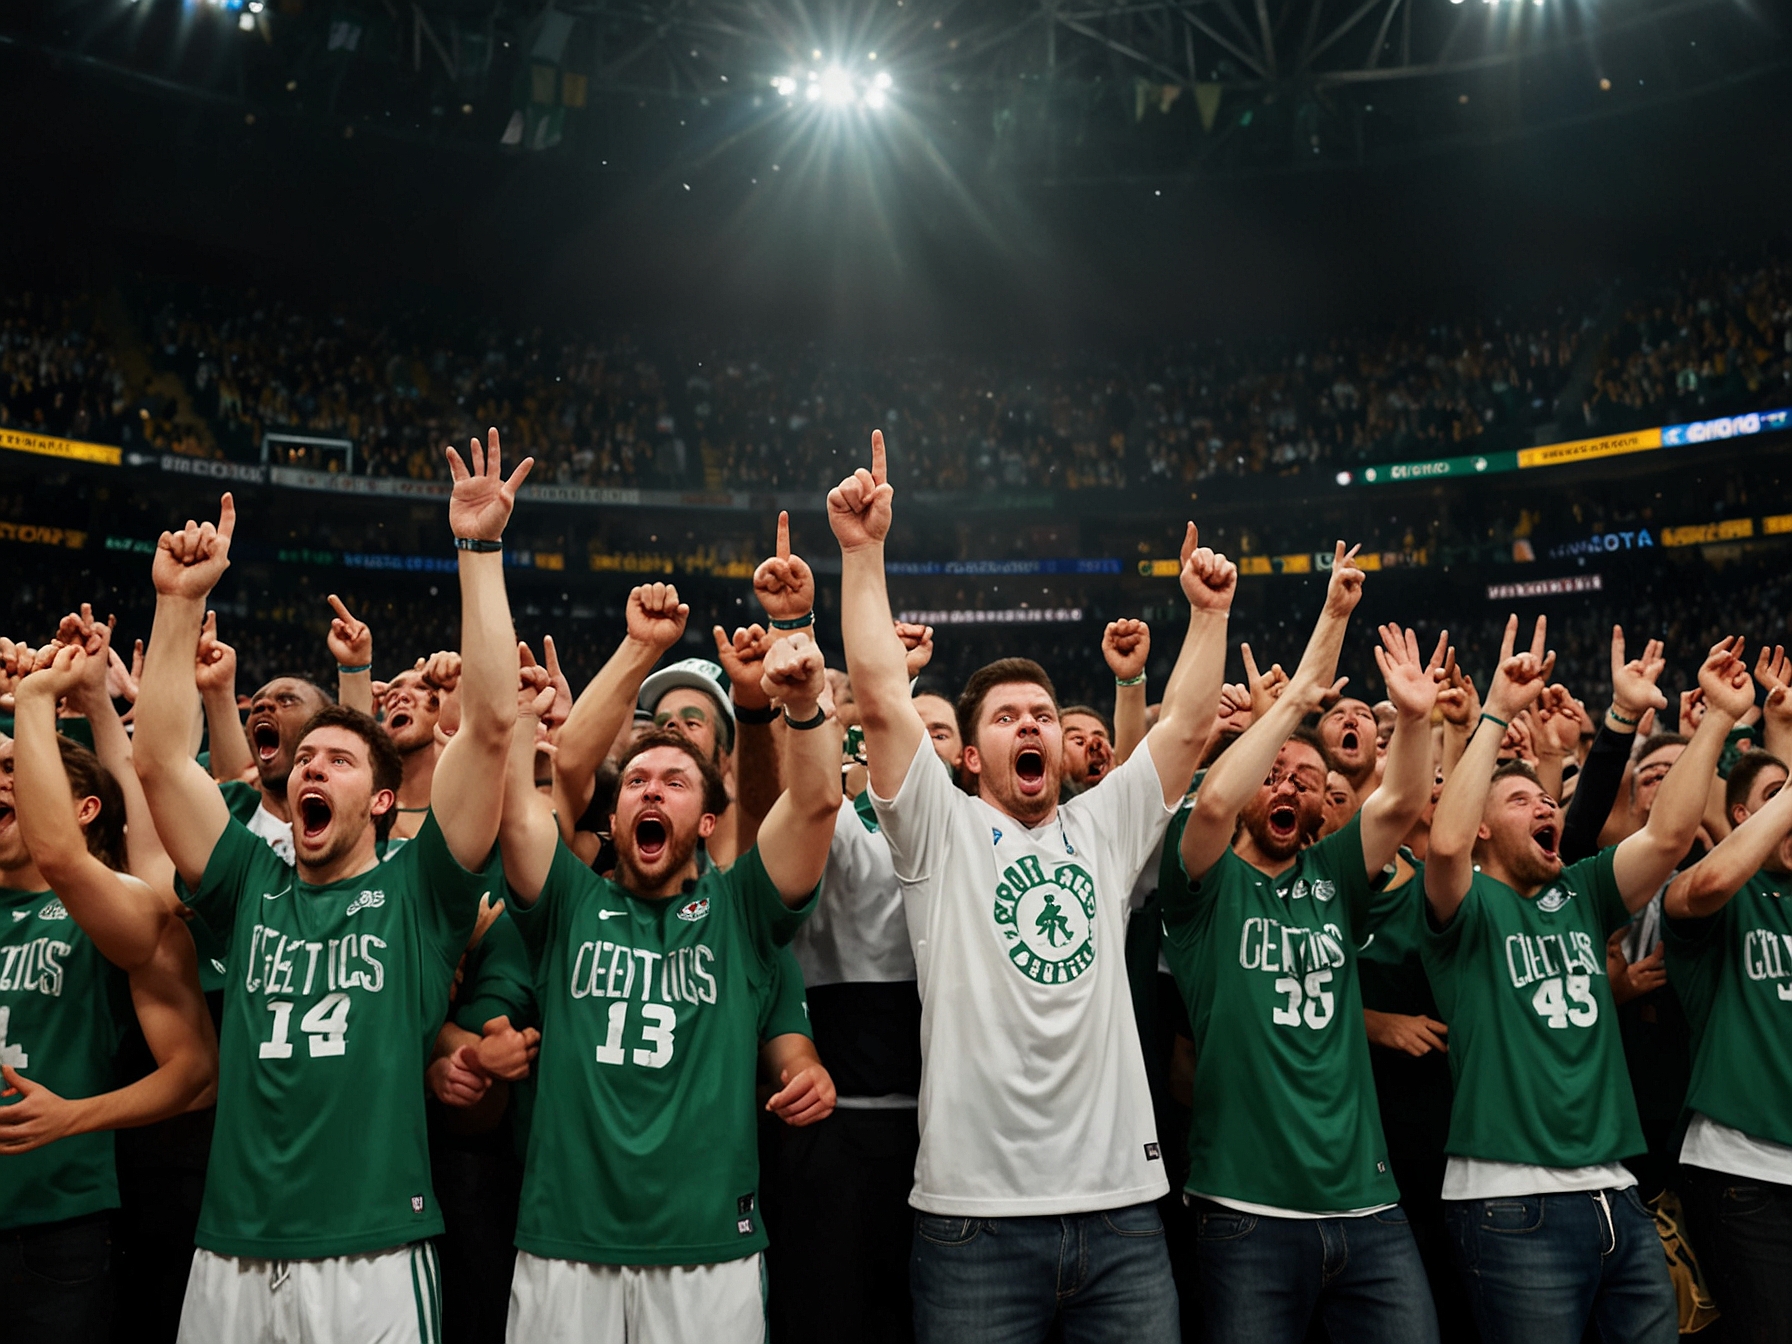 The Boston Celtics' fans erupt in celebration at the TD Garden as the team clinches their 18th NBA championship, surpassing the Los Angeles Lakers for the most titles in NBA history.